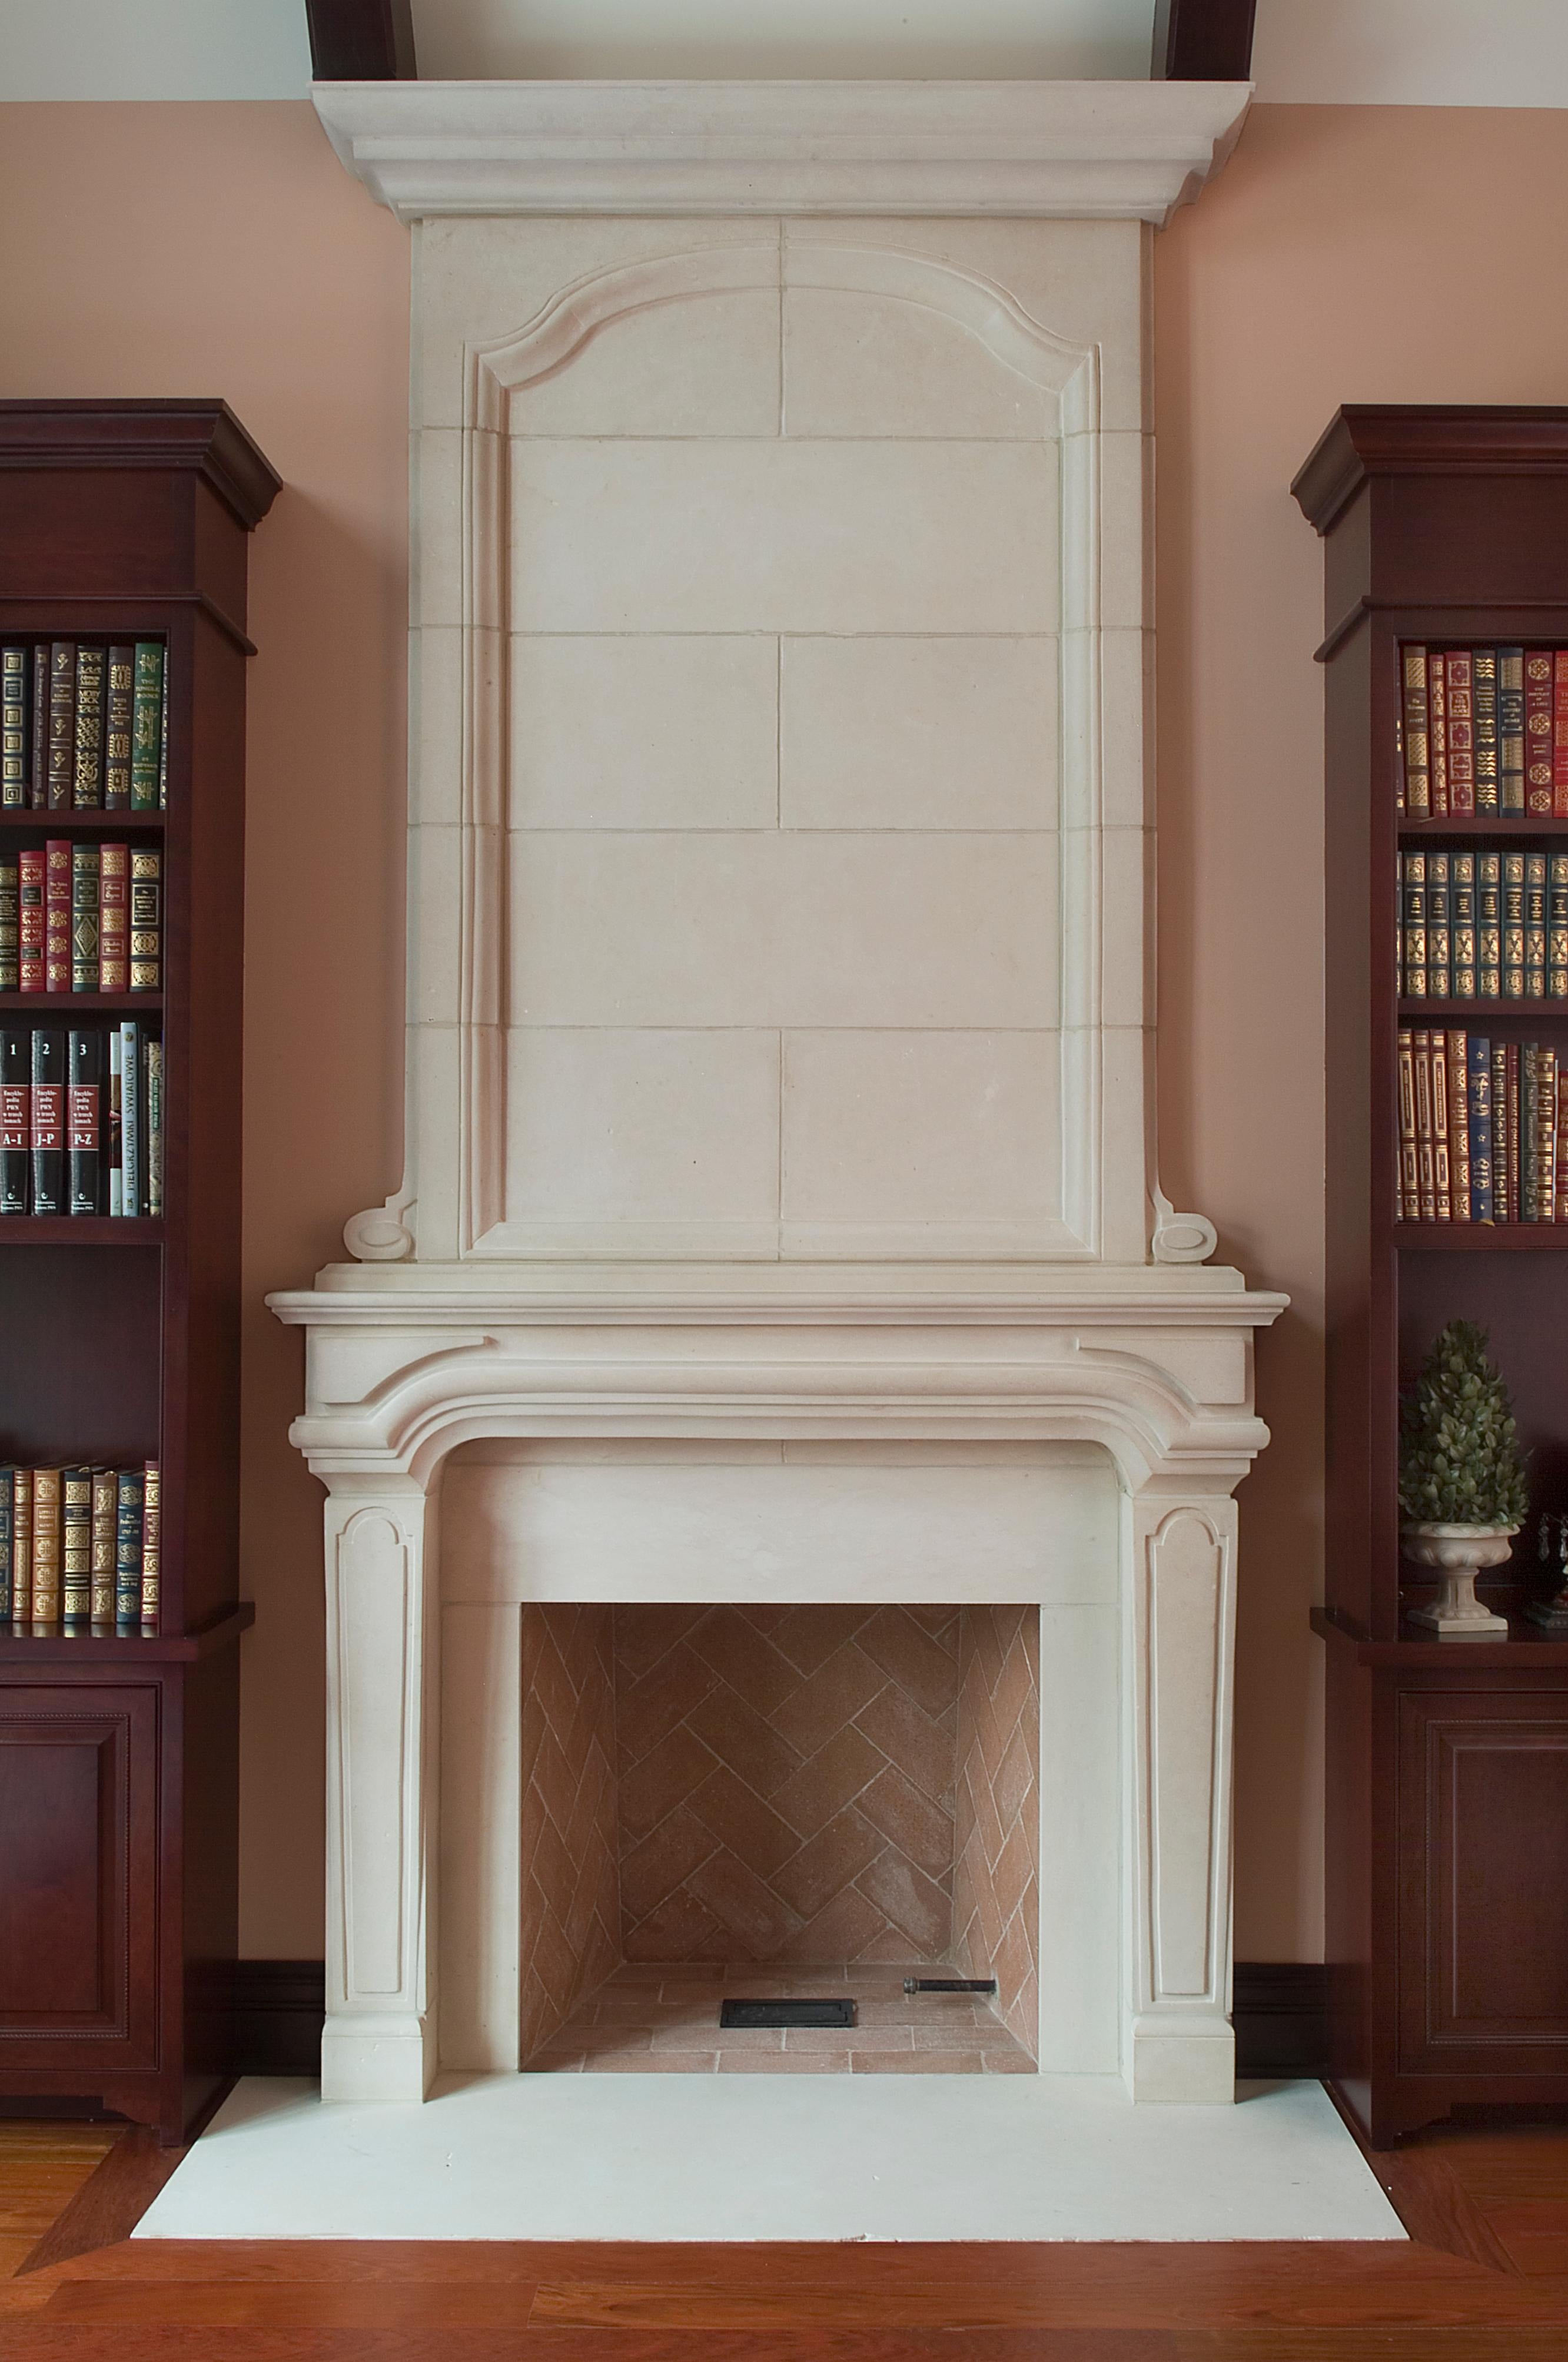 The stately, classic Regency stone fireplace, evoking the early 19th century English Regency era, can be done either with or without the overmantel.  The fireplace features square plinths, legs that slightly curve out as they go up, with recessed